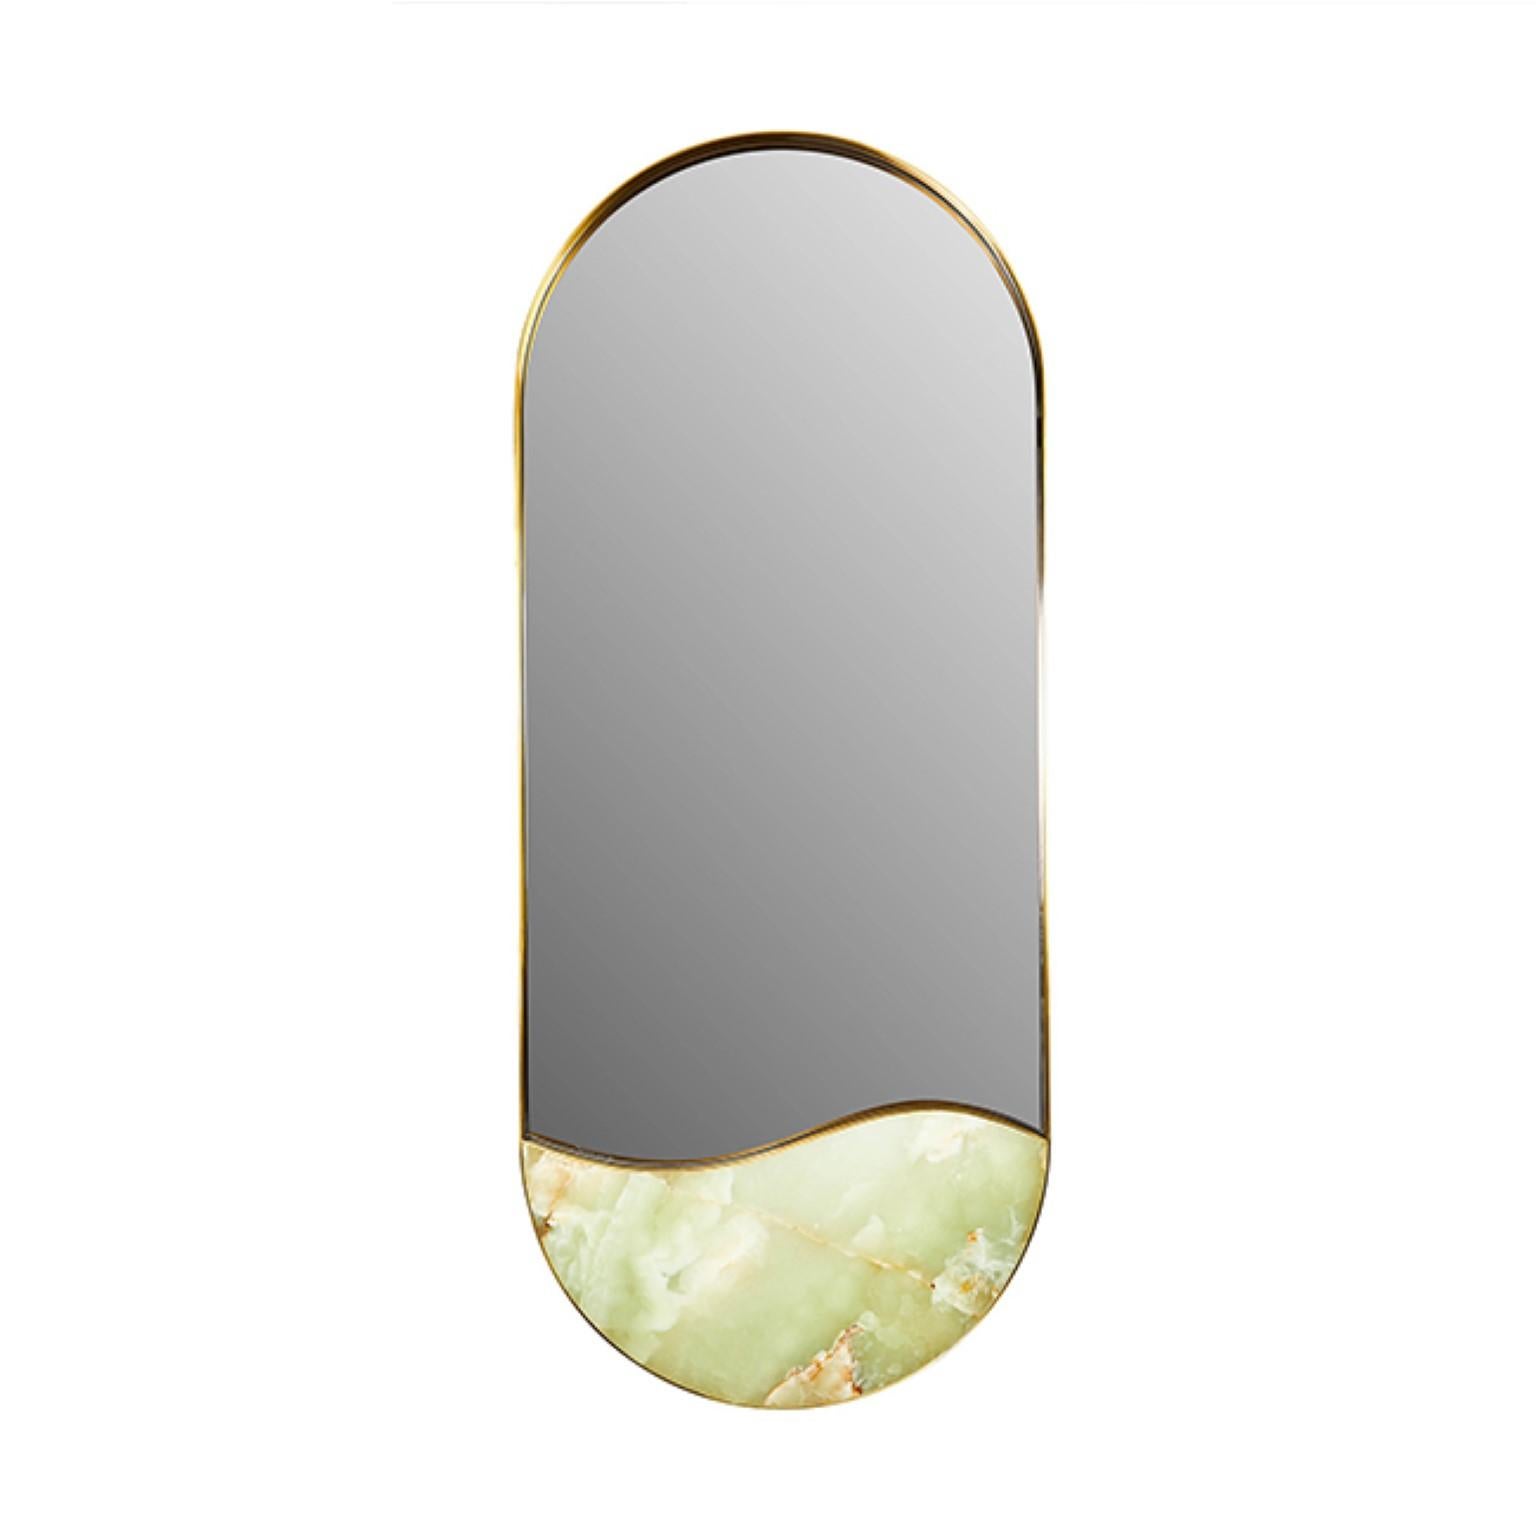 Onyx Kura mirror by Marble Balloon
Dimensions: W 50 x D 5 x H 120 cm
Materials: Brass, onyx 

Inspired by the flow of Aras River, it combines 100% brass frame with semi-precious stone details. Semi-precious stones are available in either green